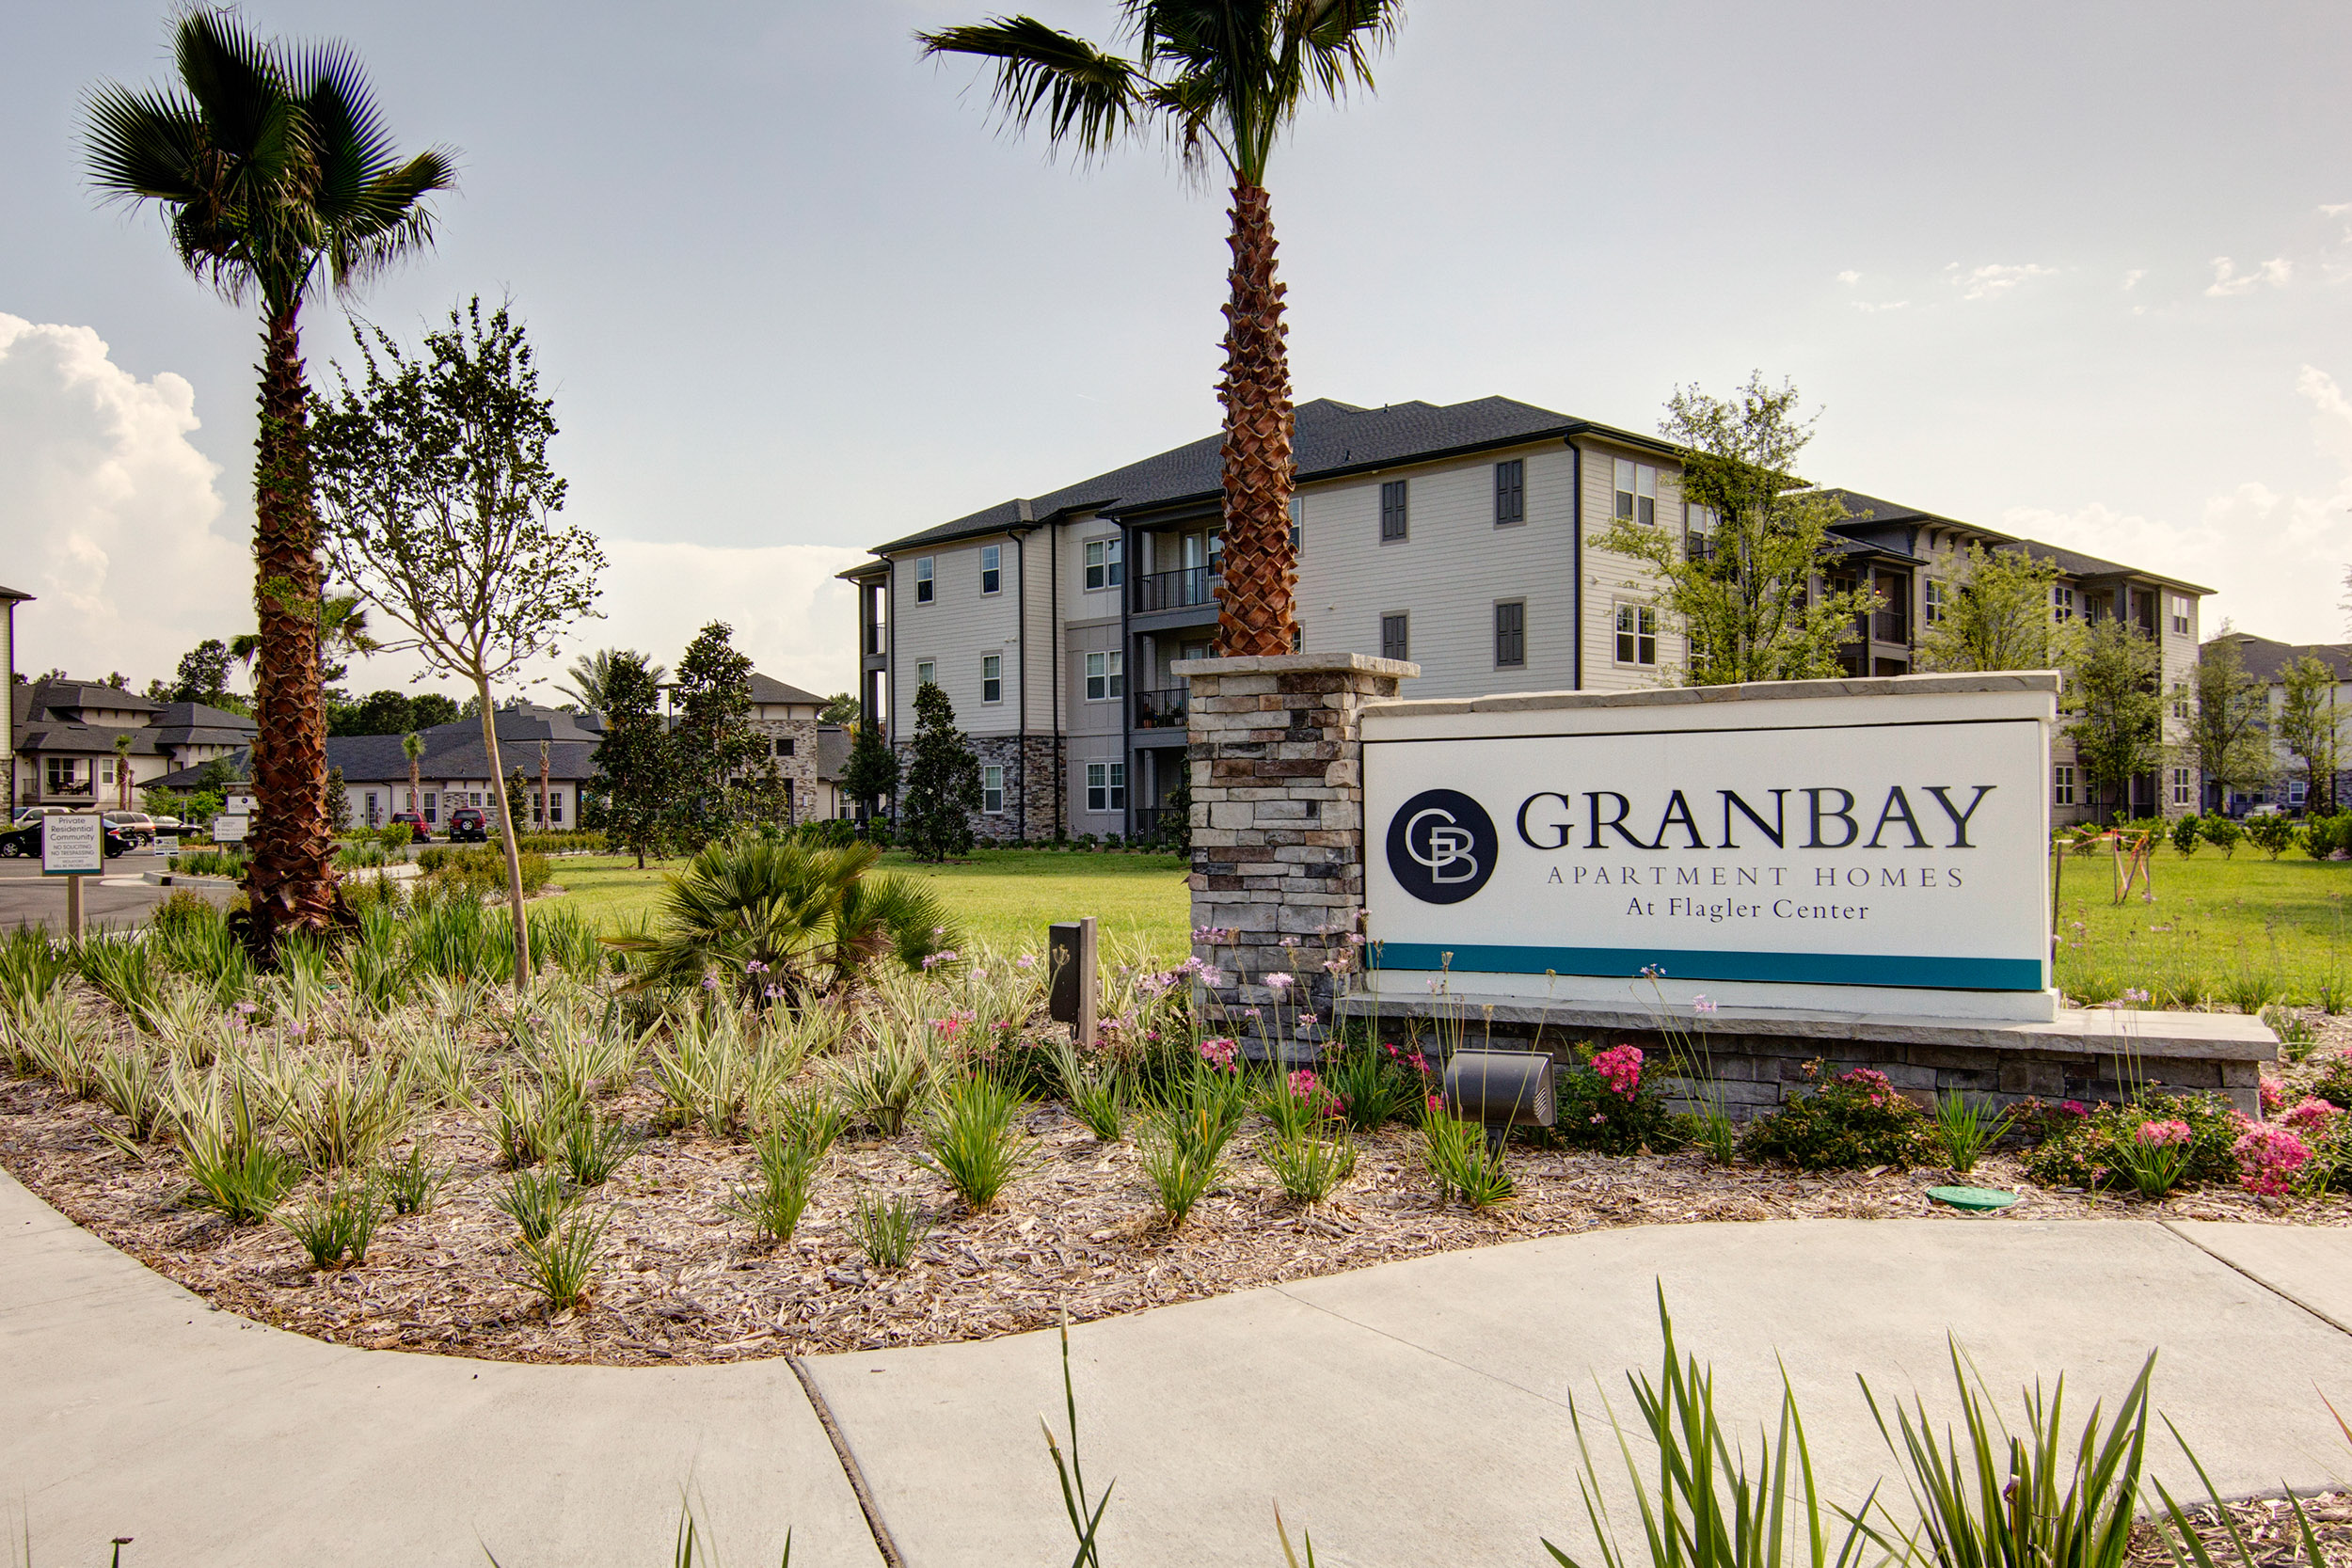 Multi story apartment complex with Gran Bay sign